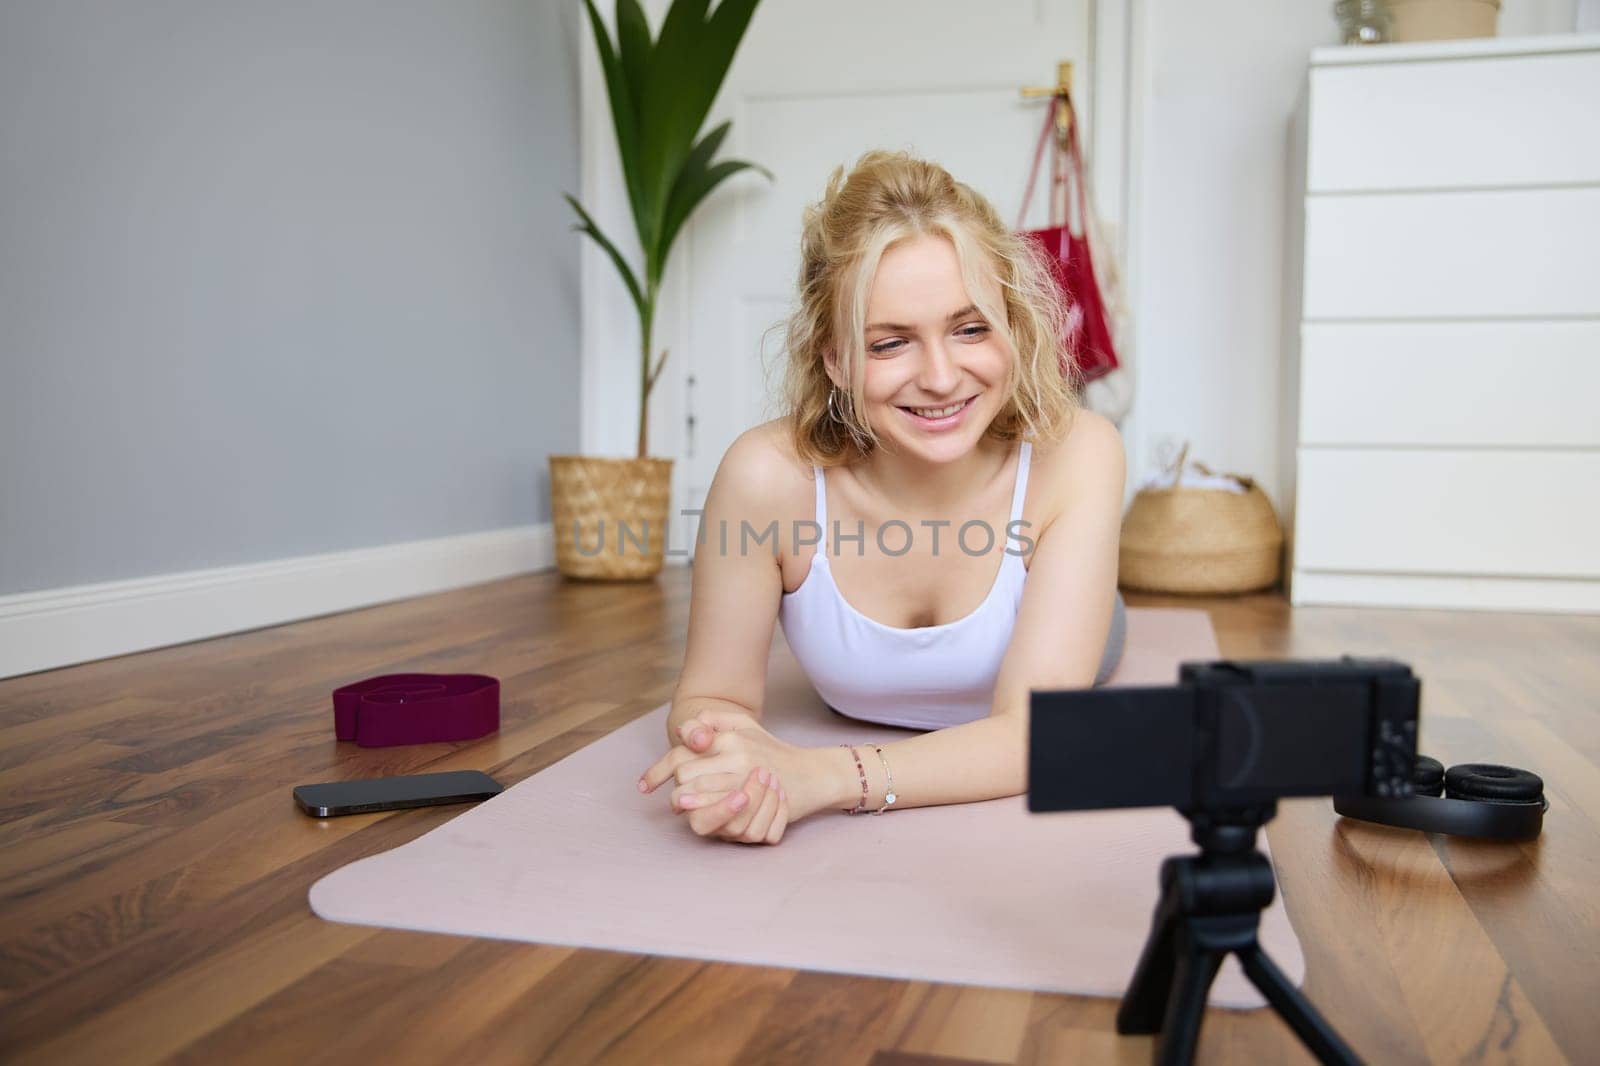 Portrait of young woman, sports vlogger, fitness instructor recording video of herself showing workout exercises, using digital camera, lying on yoga rubber mat.